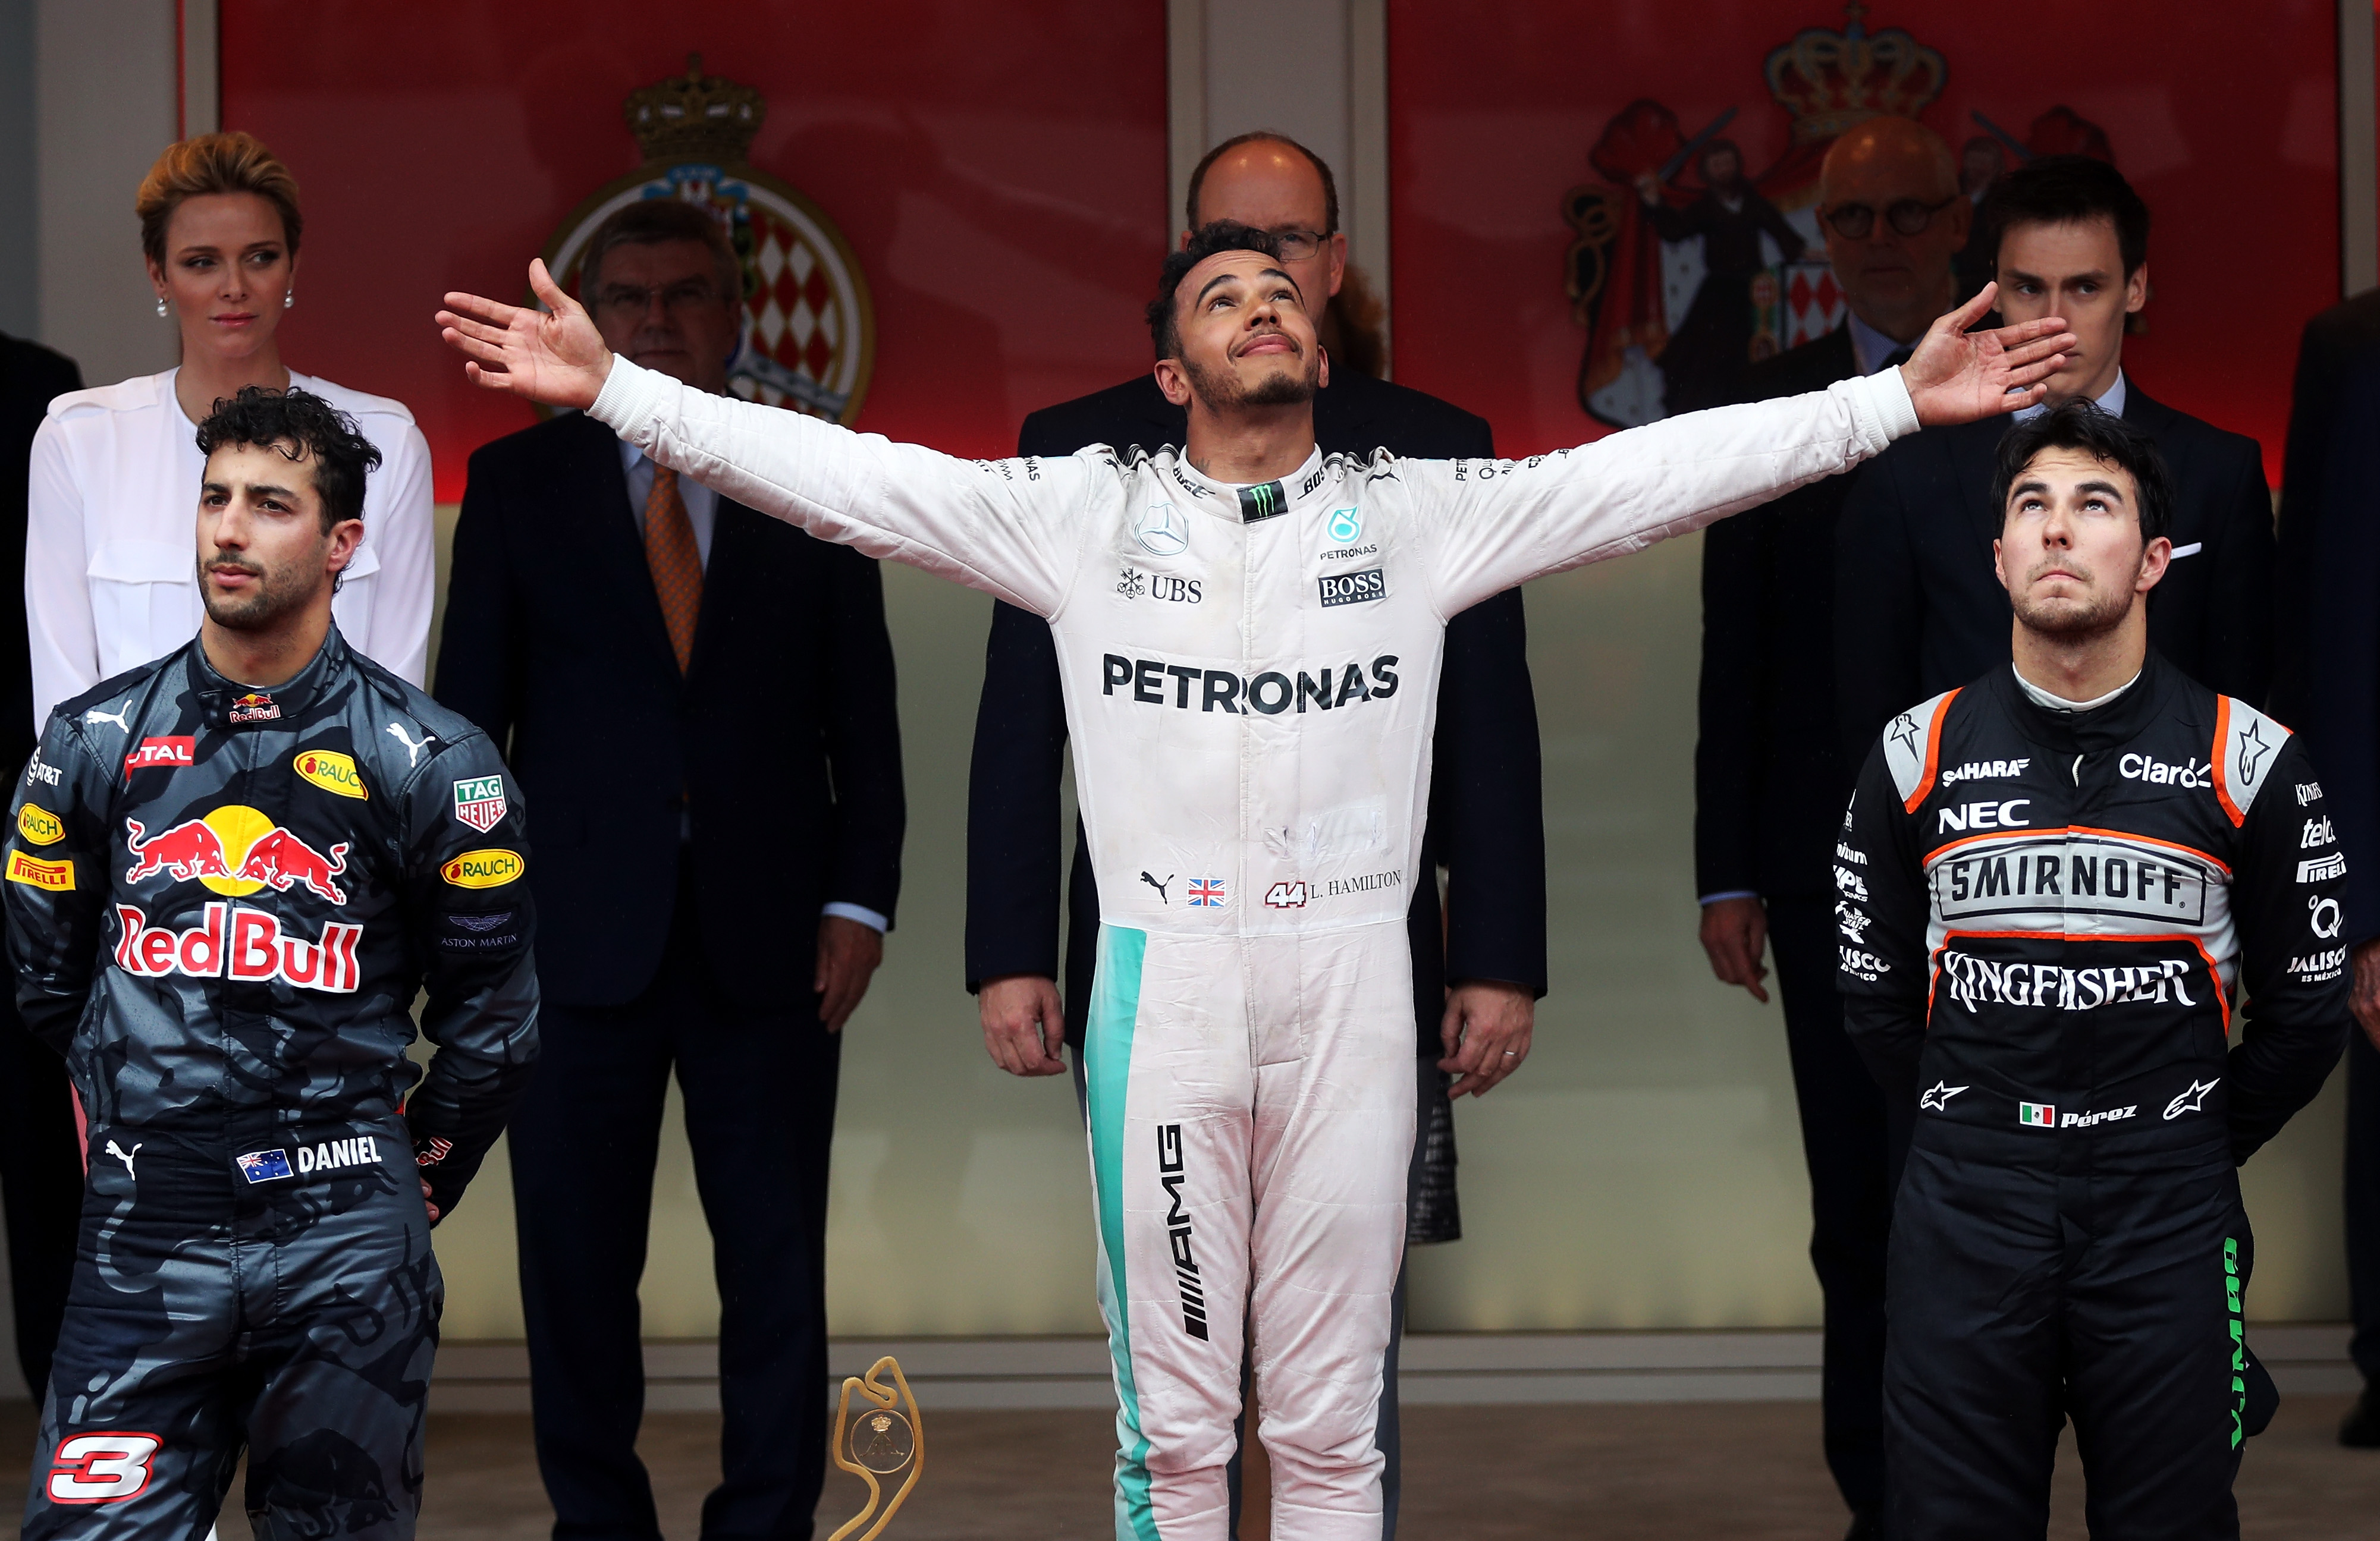 MONTE-CARLO, MONACO - MAY 29: Lewis Hamilton of Great Britain and Mercedes GP celebrates on the podium with Daniel Ricciardo of Australia and Red Bull Racing and Sergio Perez of Mexico and Force India during the Monaco Formula One Grand Prix at Circuit de Monaco on May 29, 2016 in Monte-Carlo, Monaco. (Photo by Lars Baron/Getty Images)